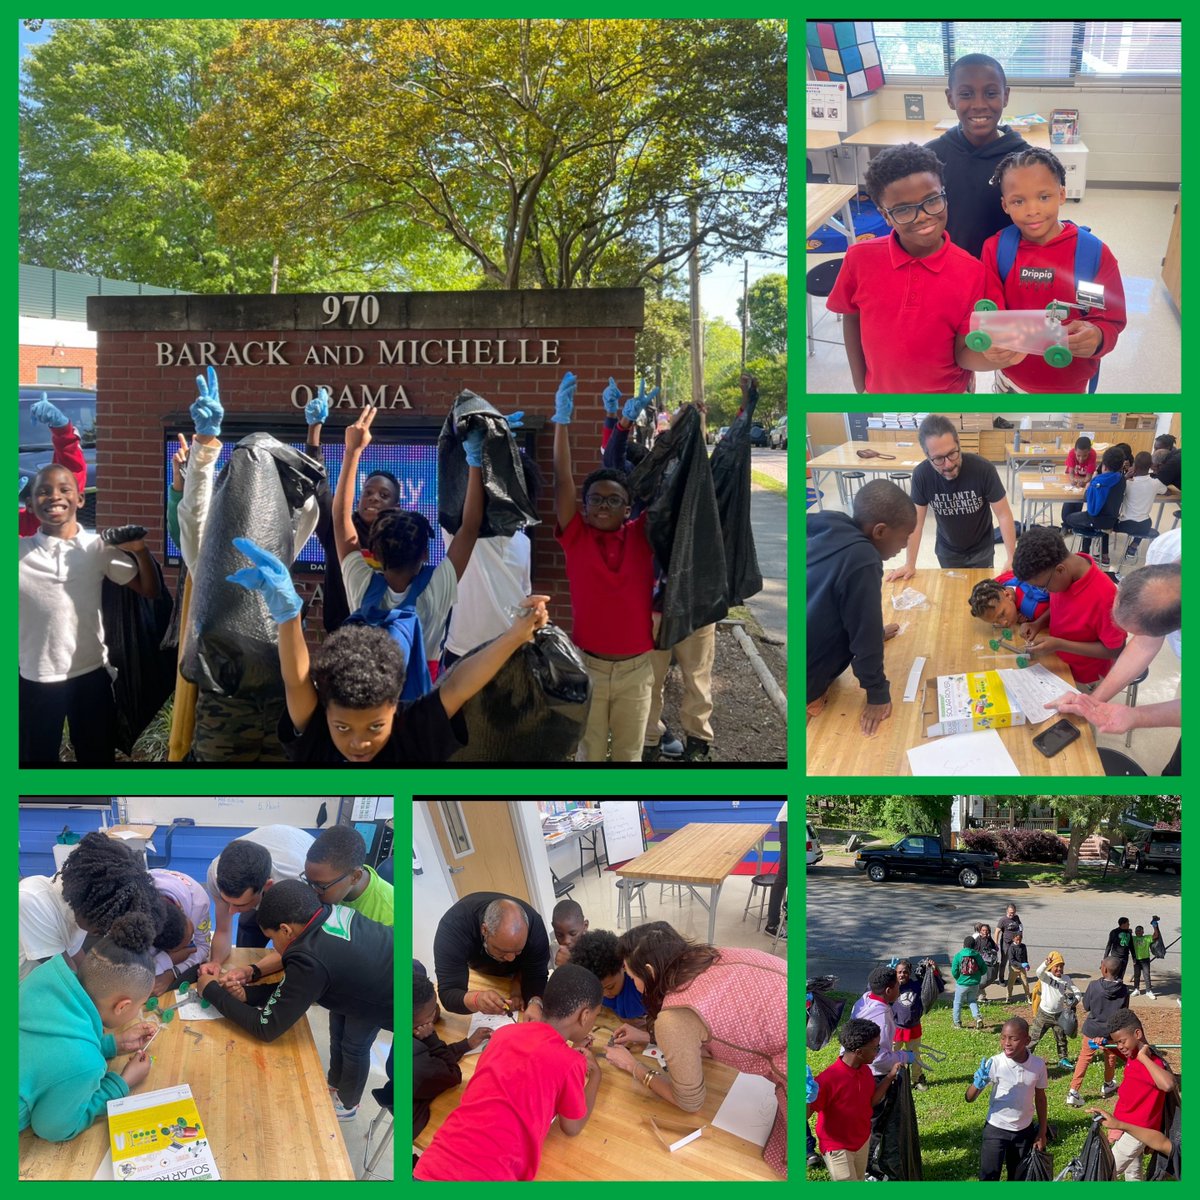 ##BAMOEagles #EarthDay was awesome yesterday our own @LaDonnisPerry led #YoungKings thru a campus clean up, and solar car activity with help from supporters! #GreenFun @apsupdate @robinviews @ap_holloman #Atlantapublicschools